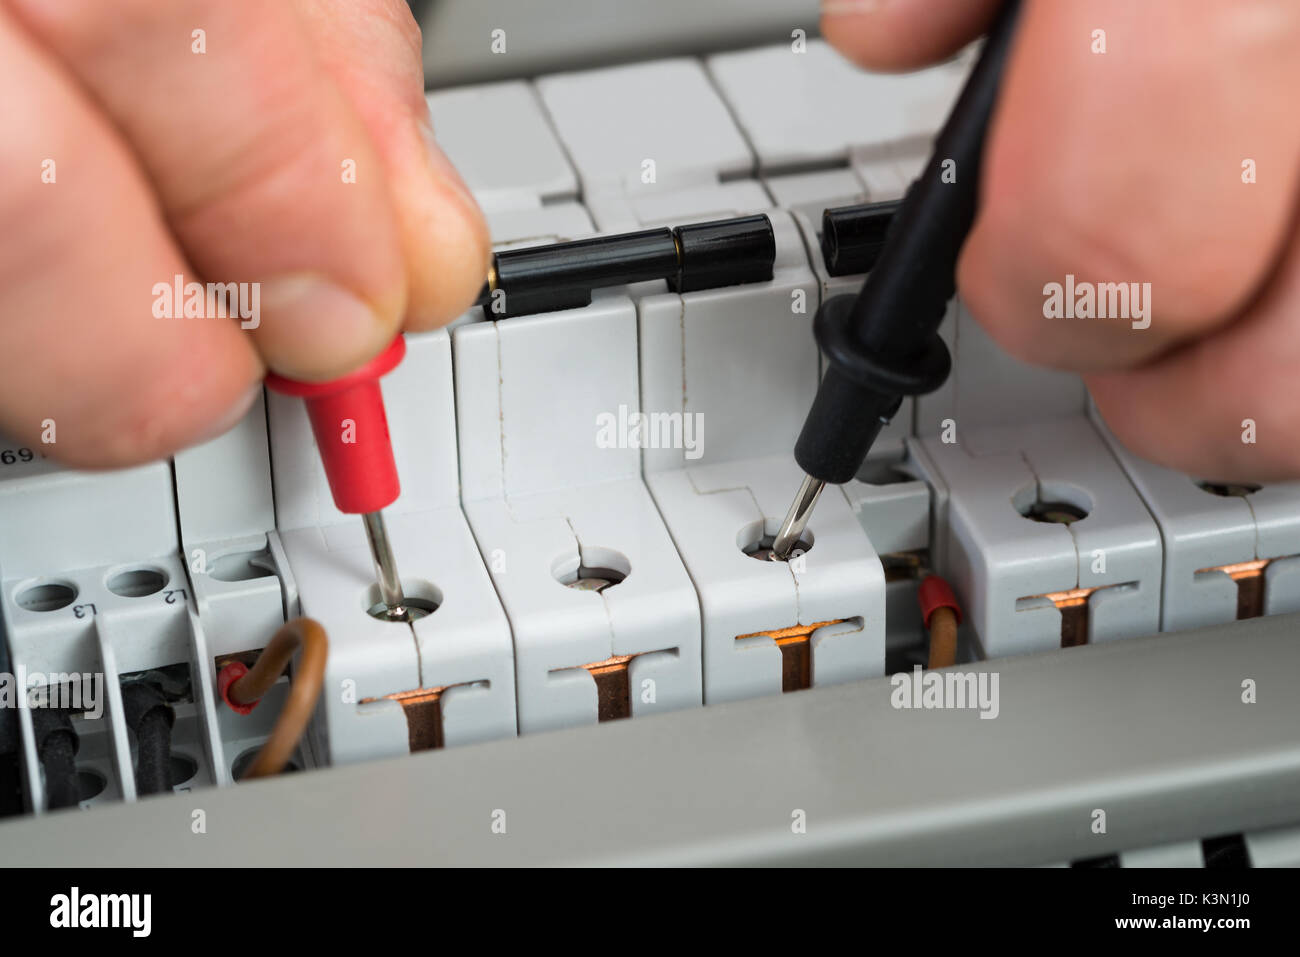 Close-up Of A Technician Checking Fuse With Multimeter Stock Photo